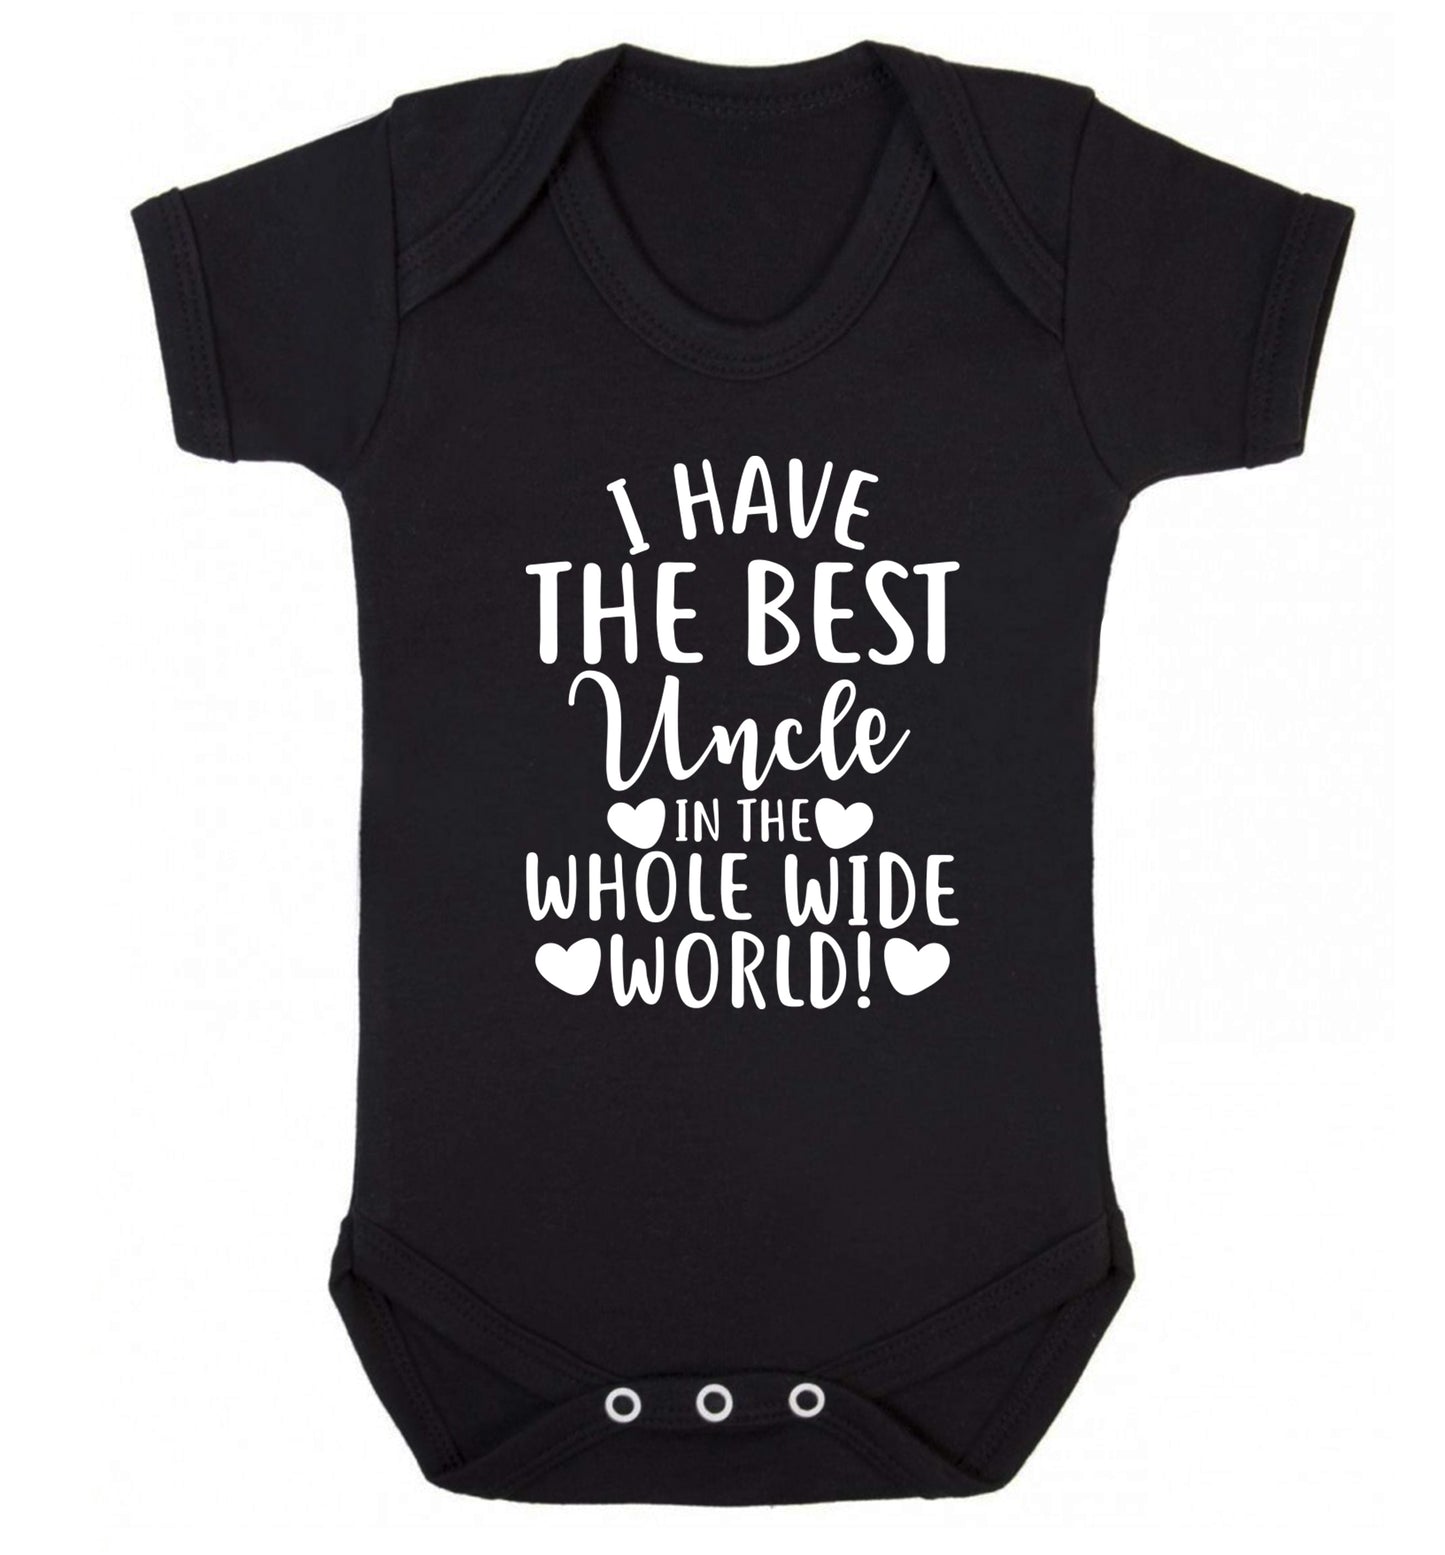 I have the best uncle in the whole wide world! Baby Vest black 18-24 months